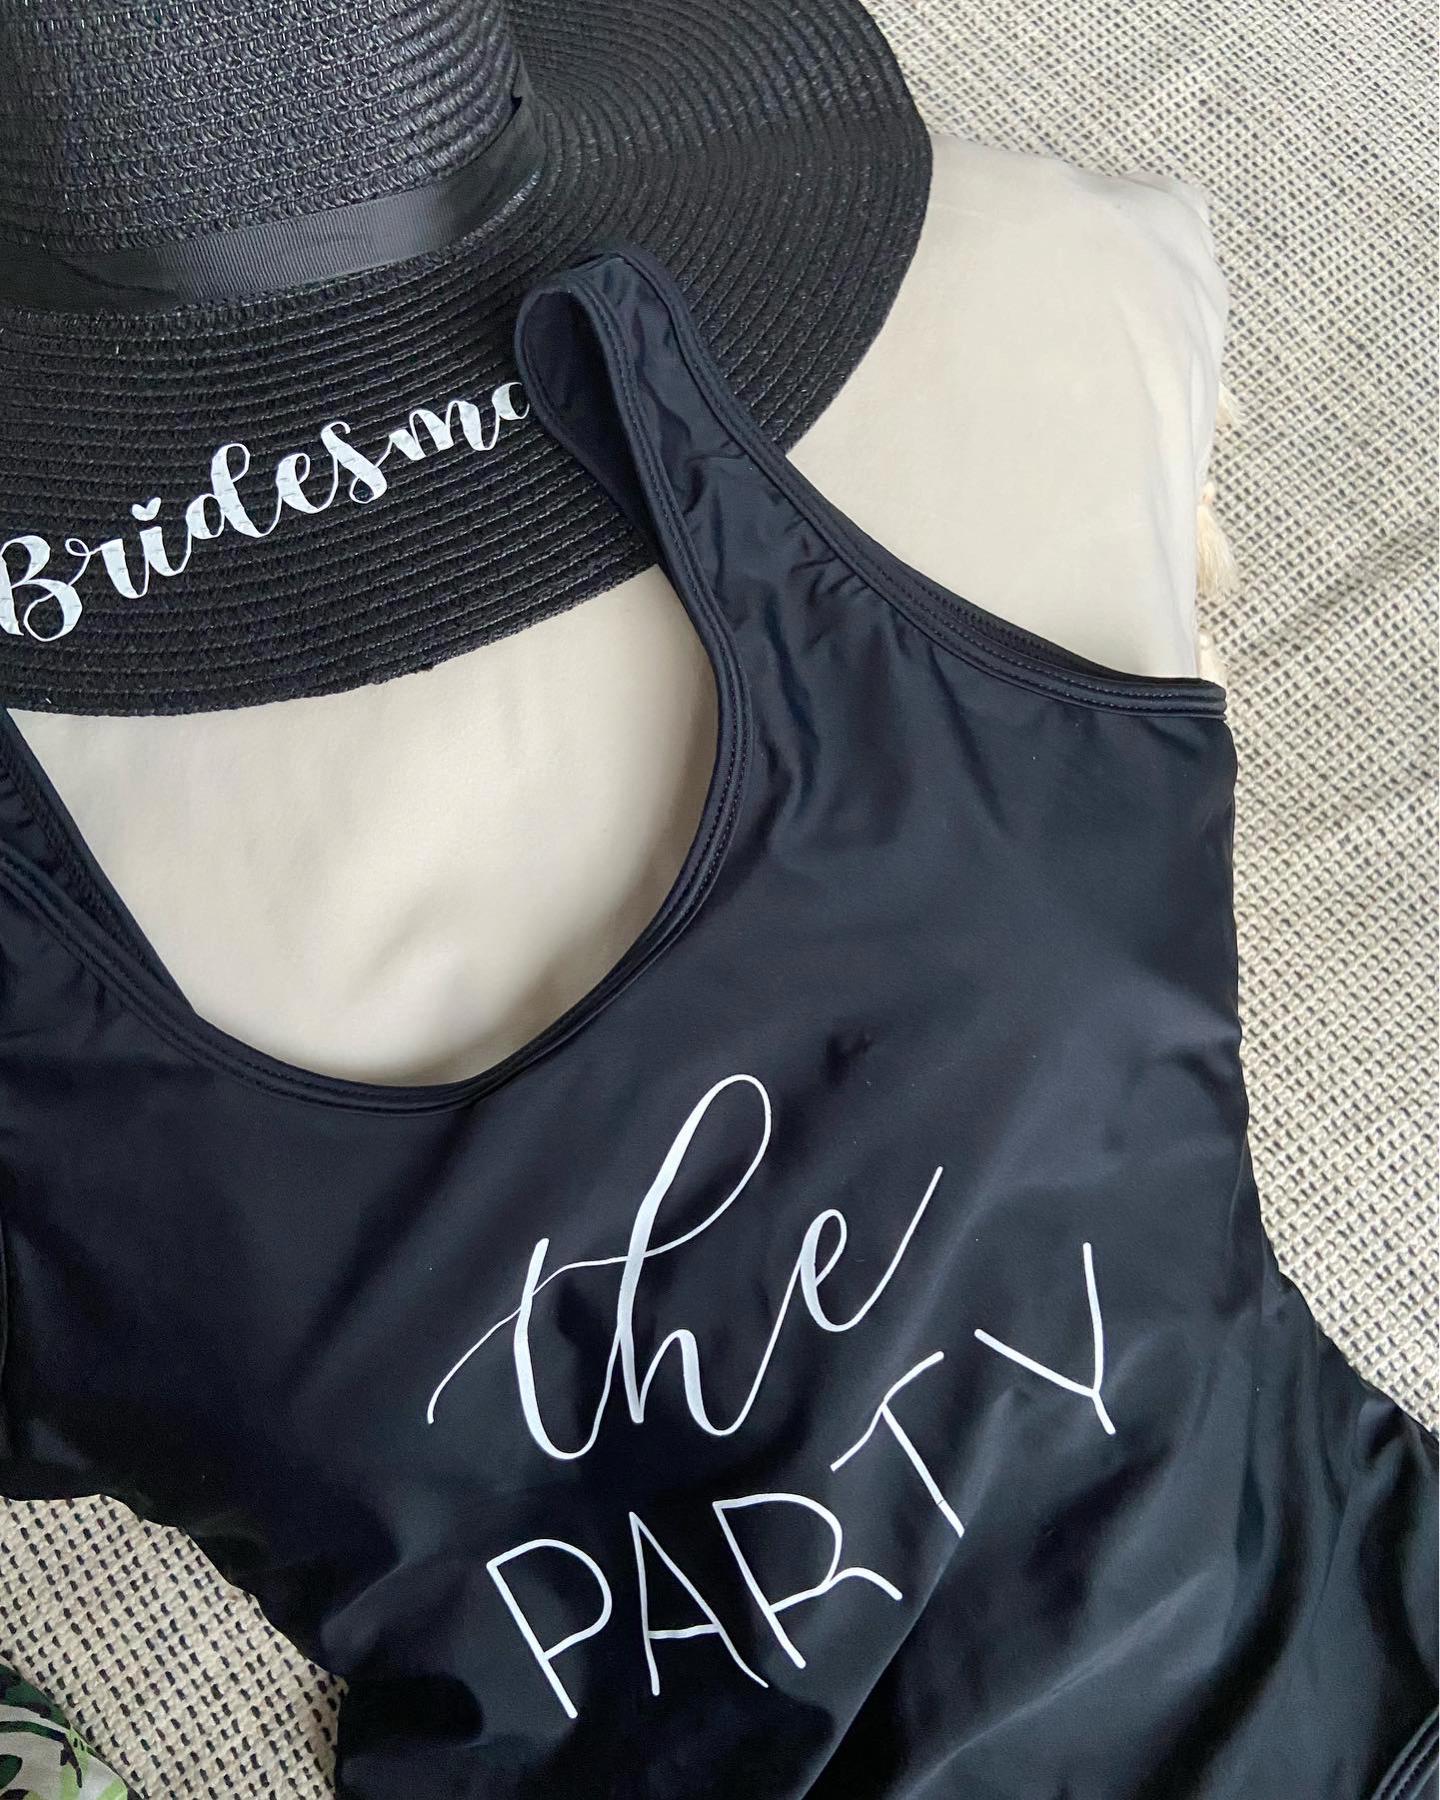 Bridesmaids swim wear gifted by the Bride.